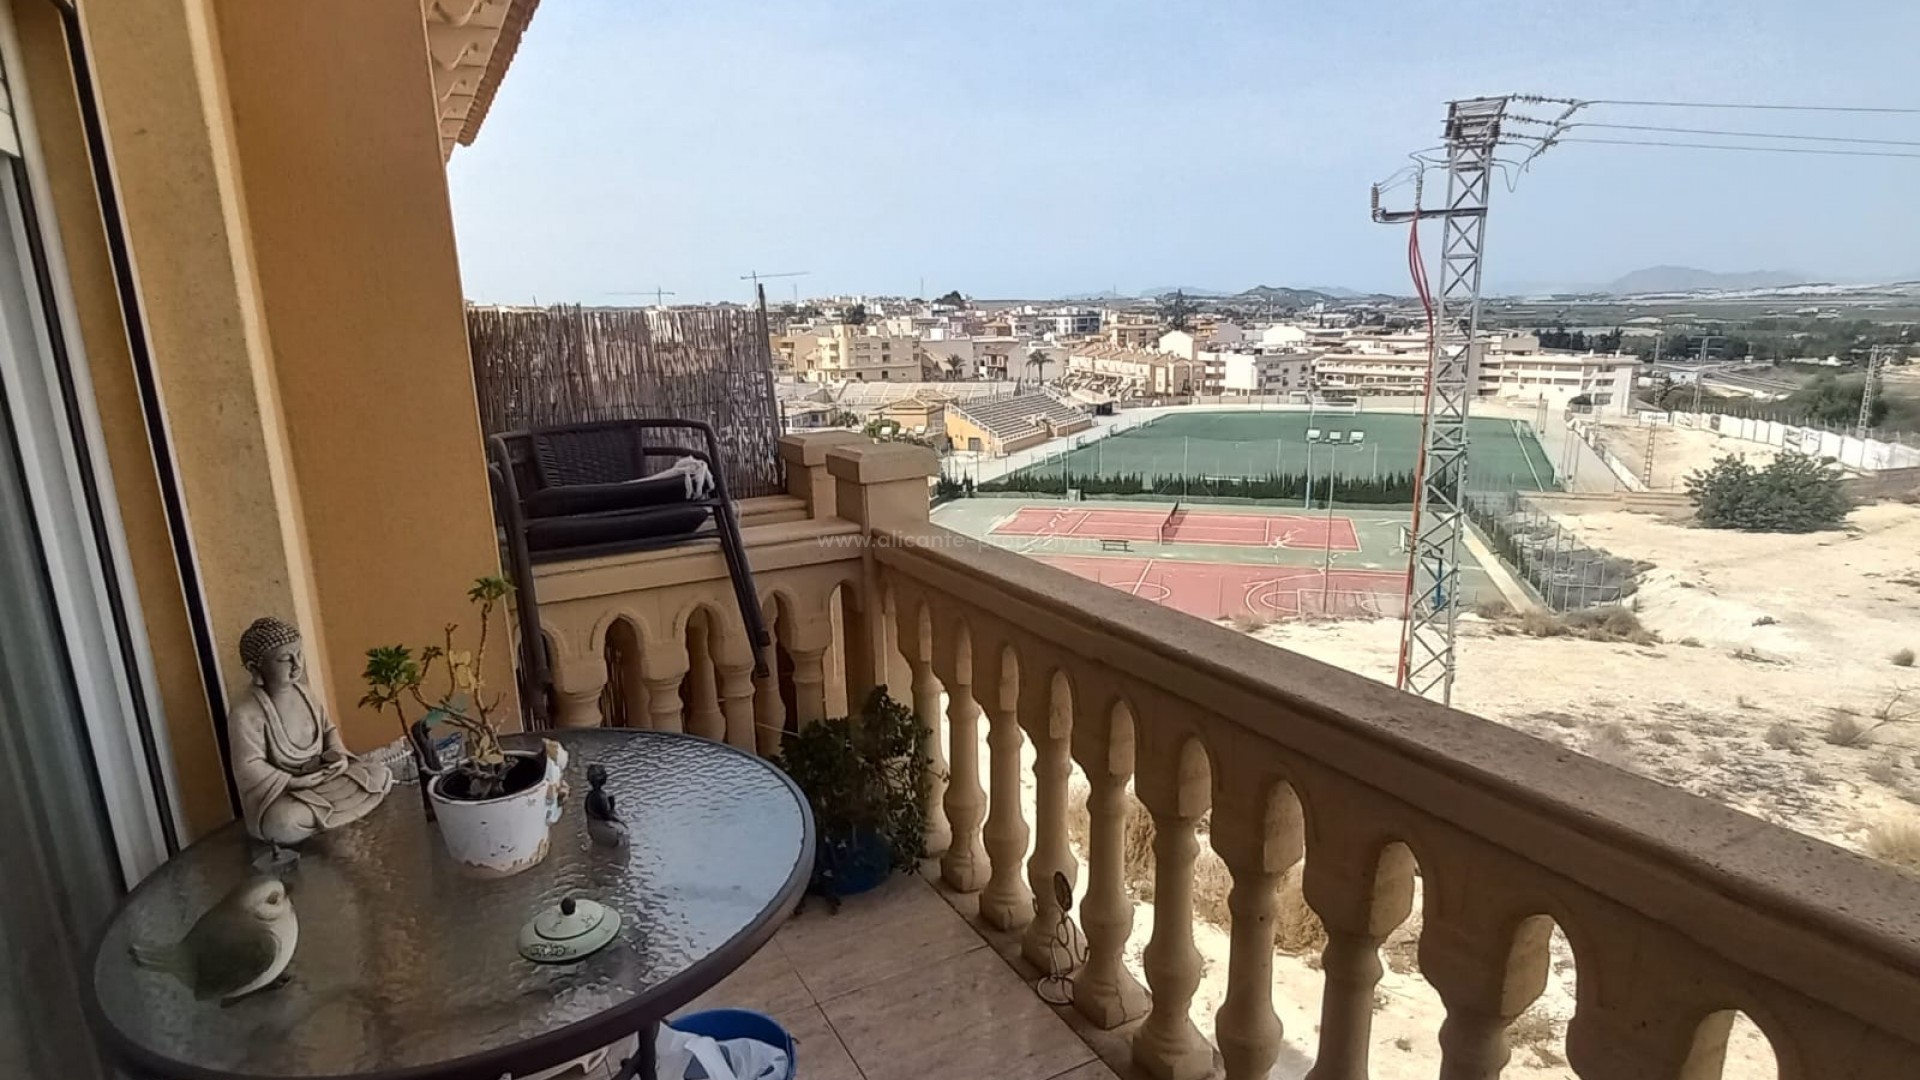 Apartment / flat in San Miguel